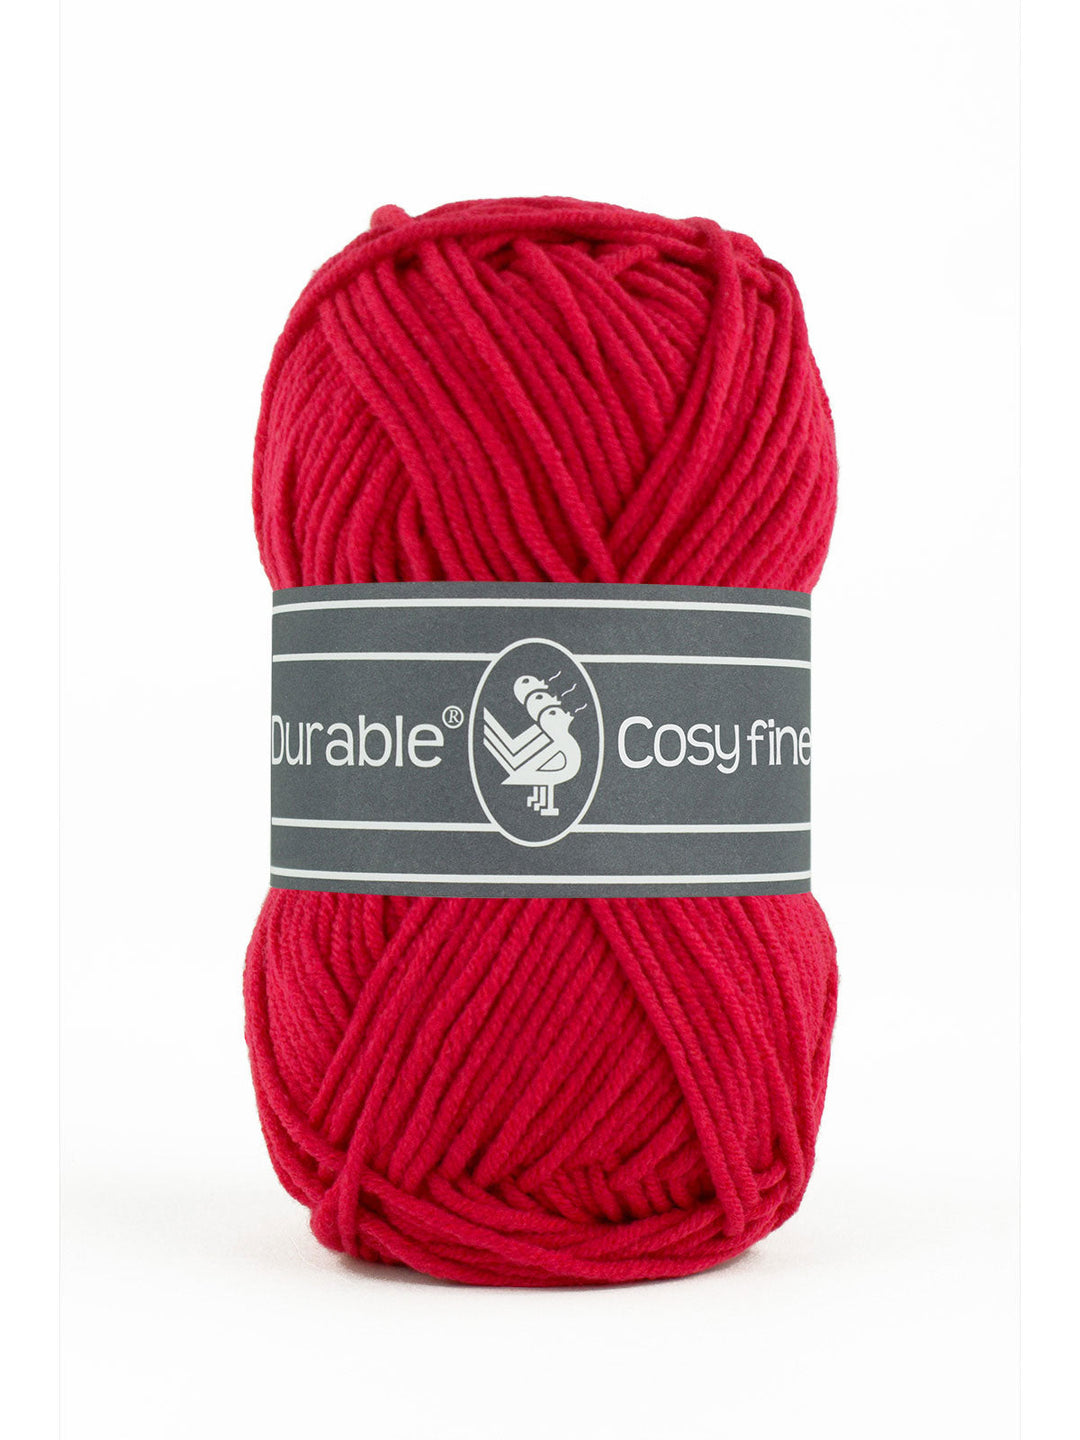 Durable Cosy Fine 317 Deep red